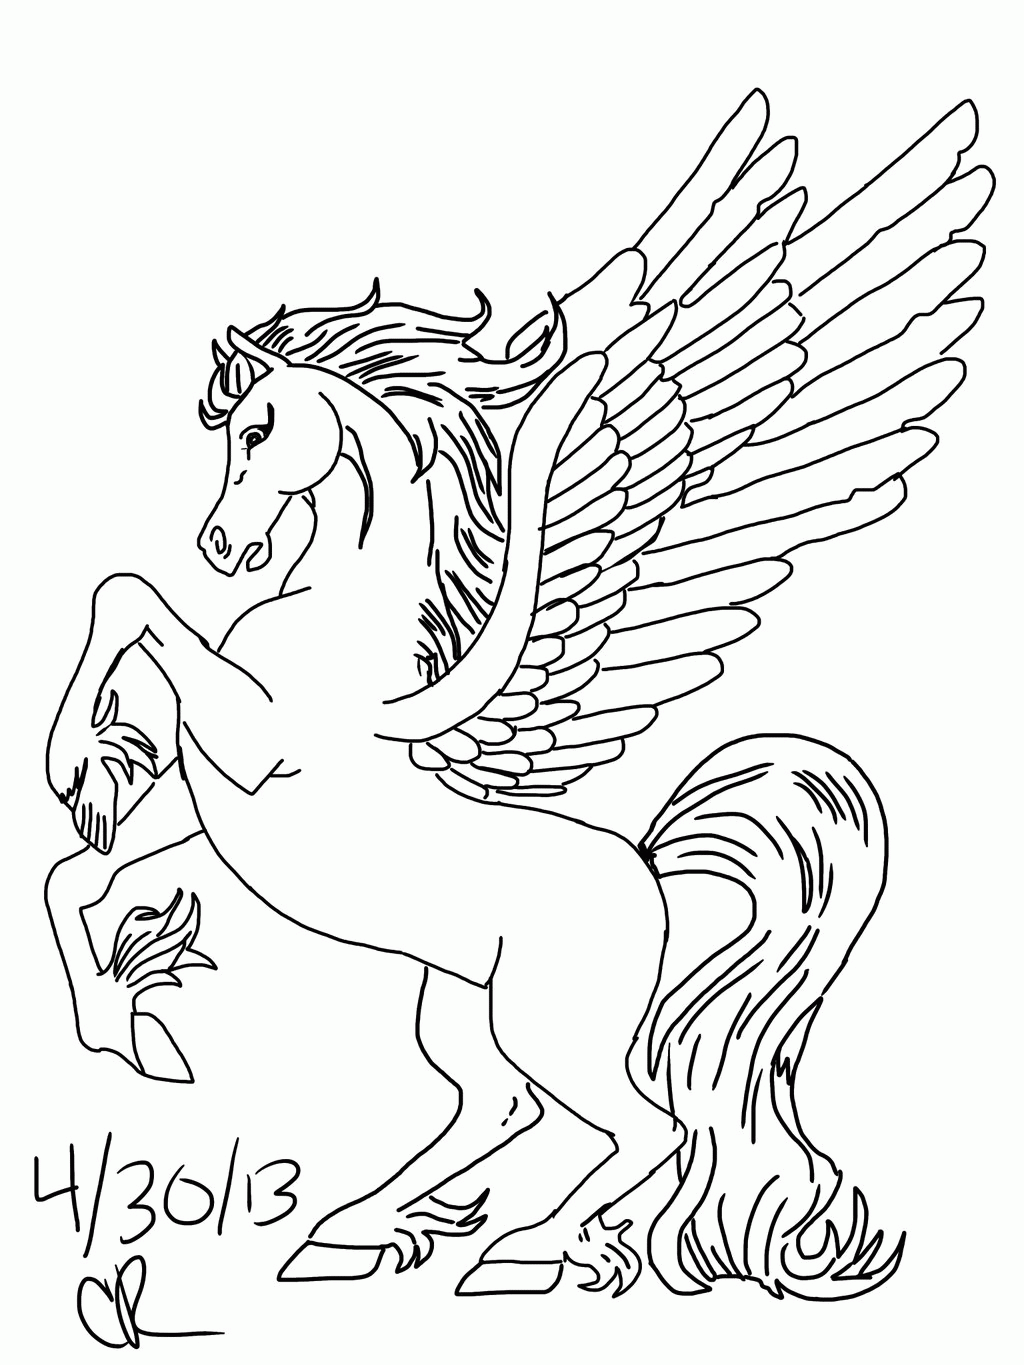 Pegasus - Coloring Pages for Kids and for Adults